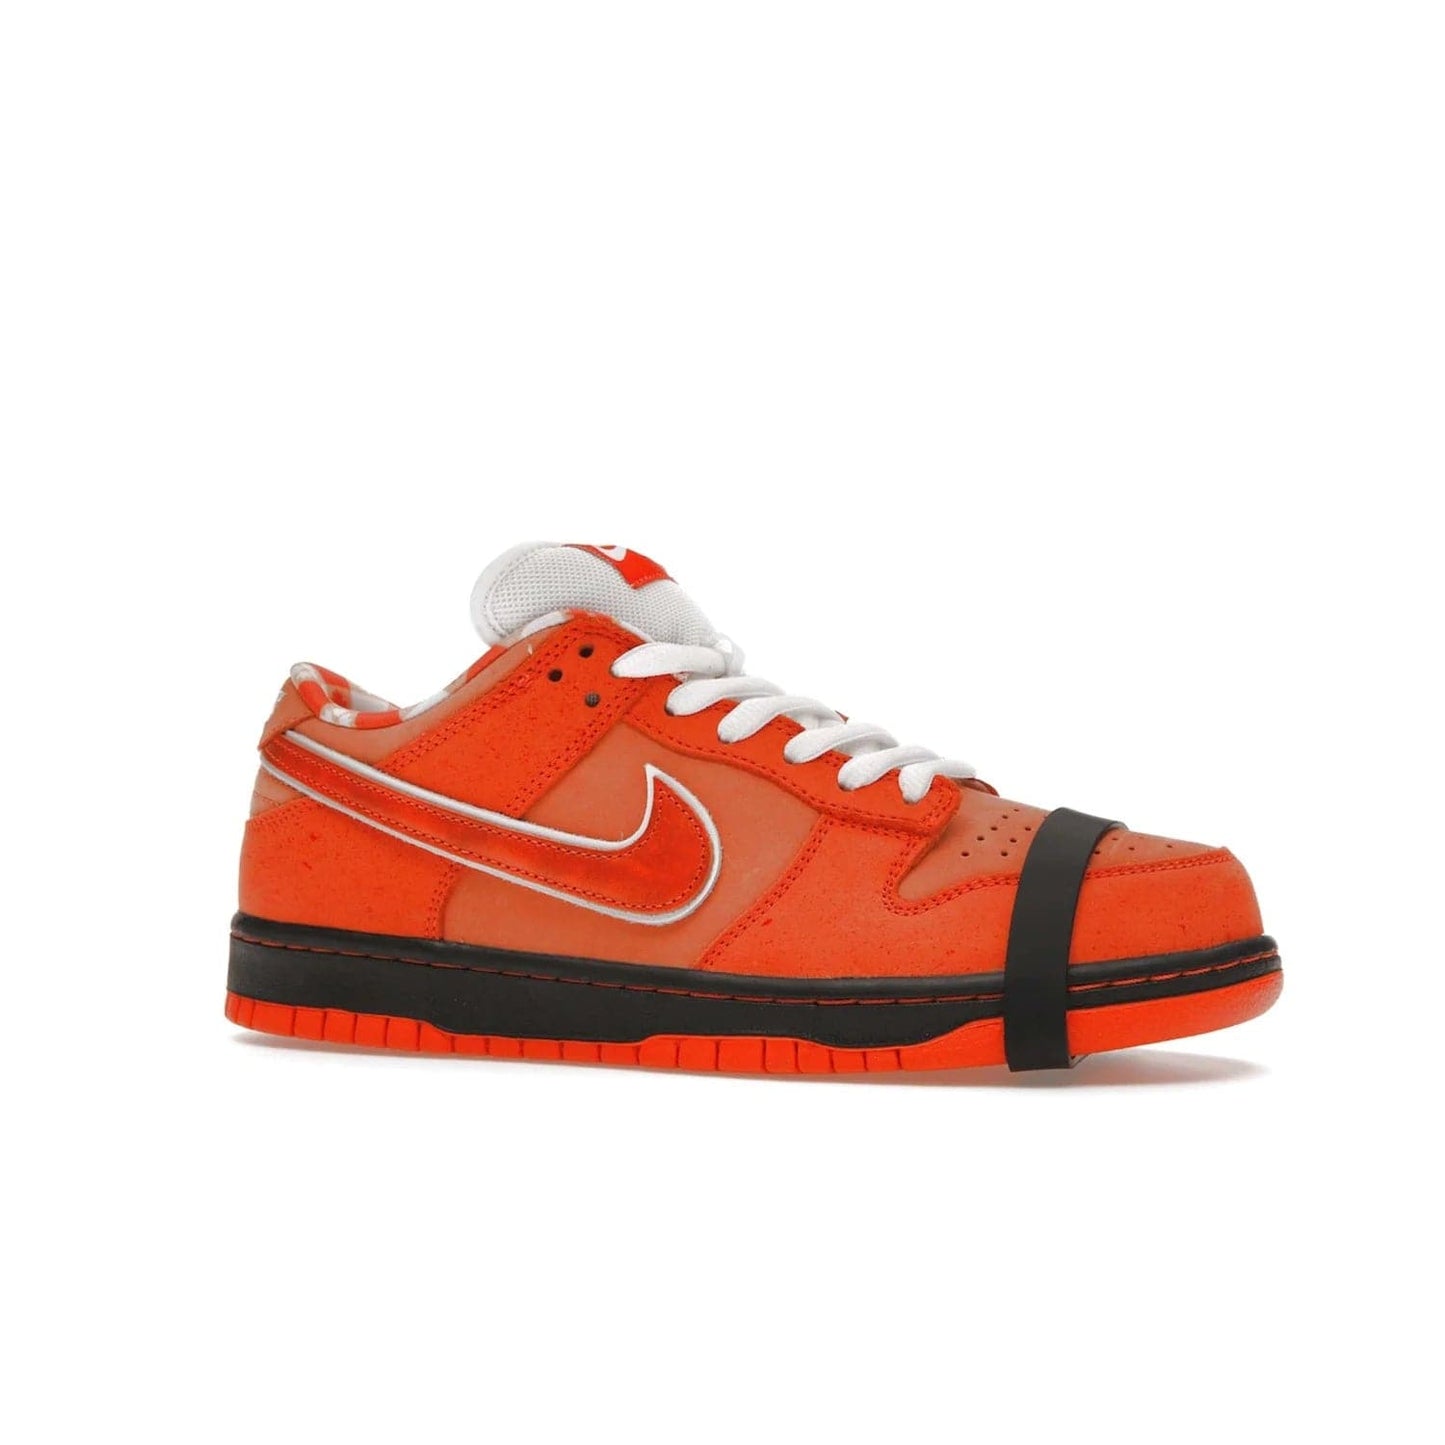 Nike SB Dunk Low Concepts Orange Lobster - Image 3 - Only at www.BallersClubKickz.com - Make a statement with the Nike SB Dunk Low Concepts Orange Lobster. Variety of orange hues, nubuck upper, bib-inspired lining & rubber outsole create bold look & comfortable blend of style. Available December 20th, 2022.